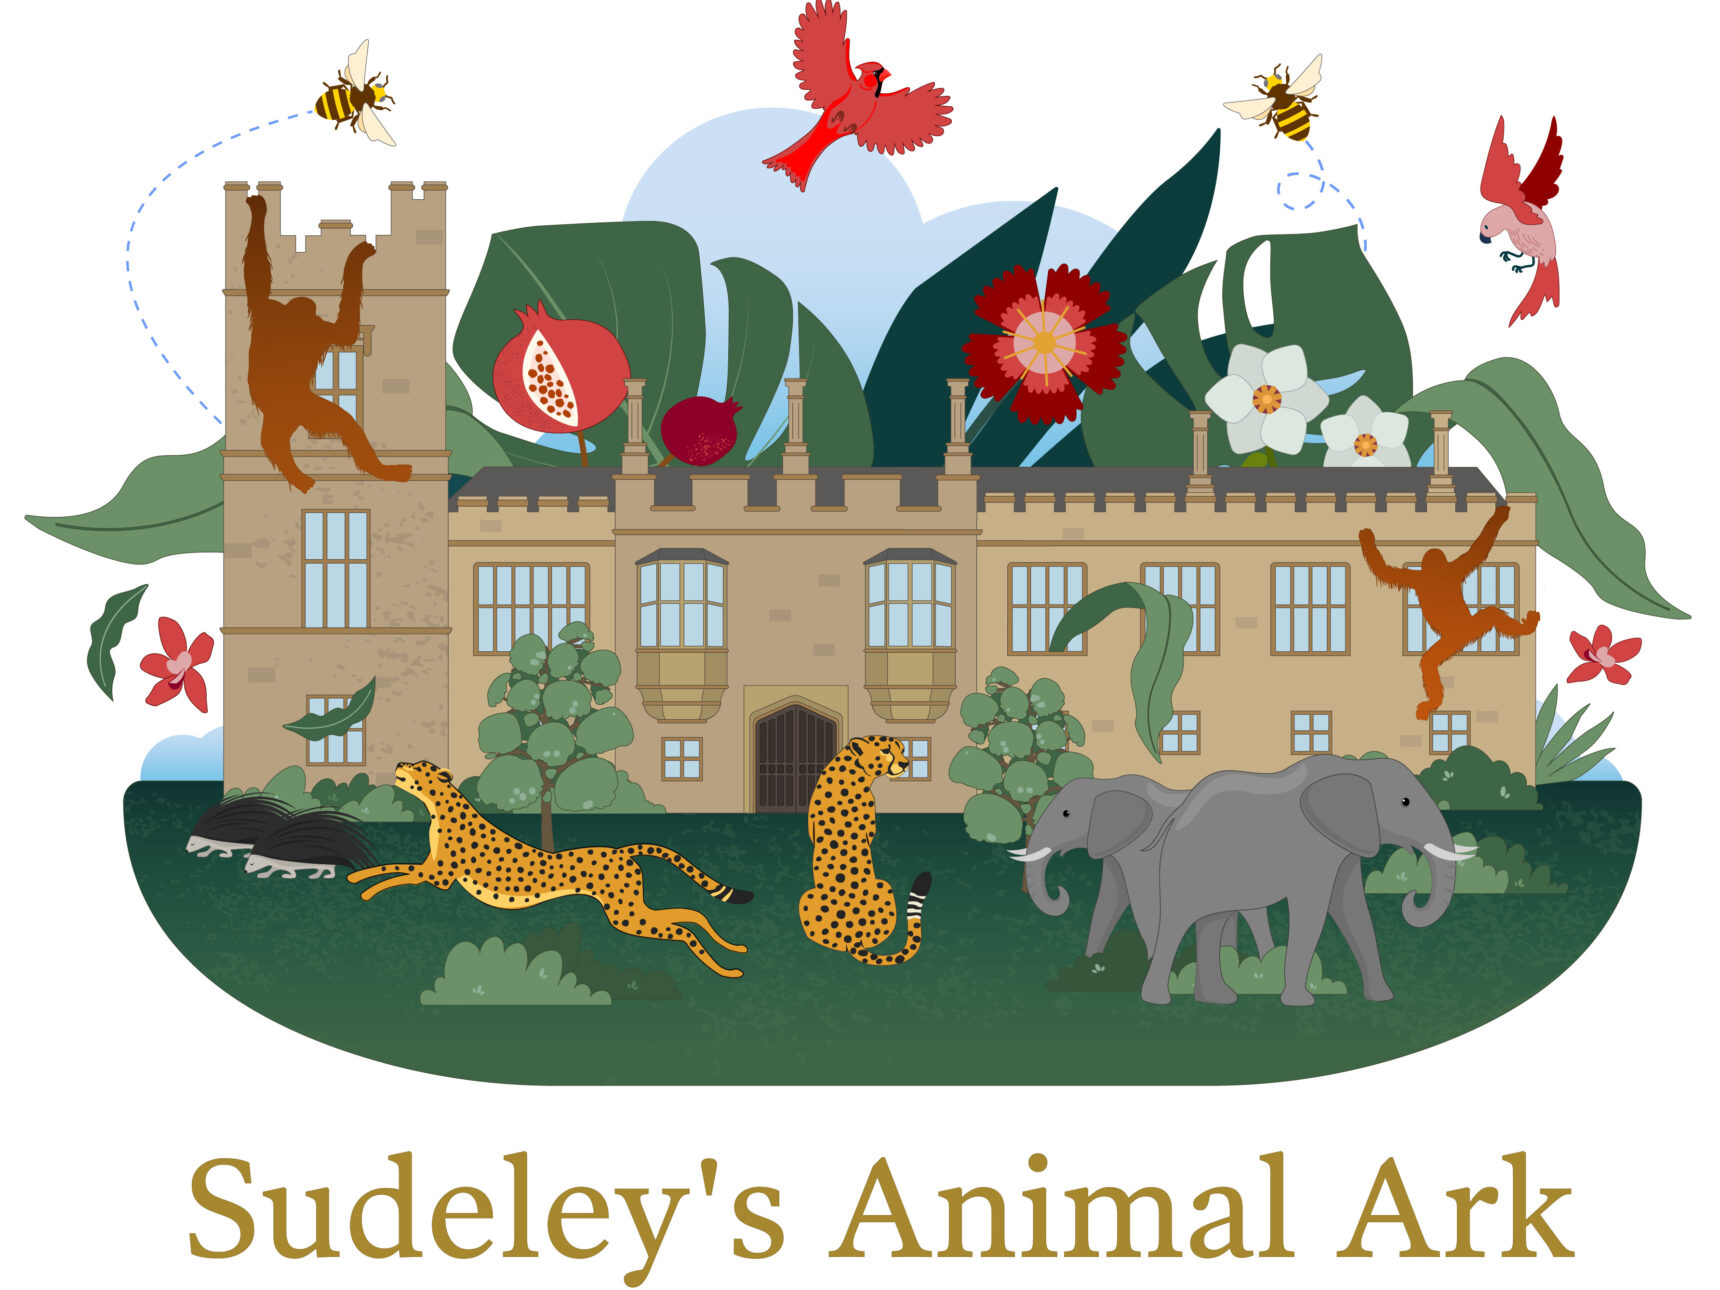 'Bugeley Castle' can be found within Sudeley's Animal Ark zone